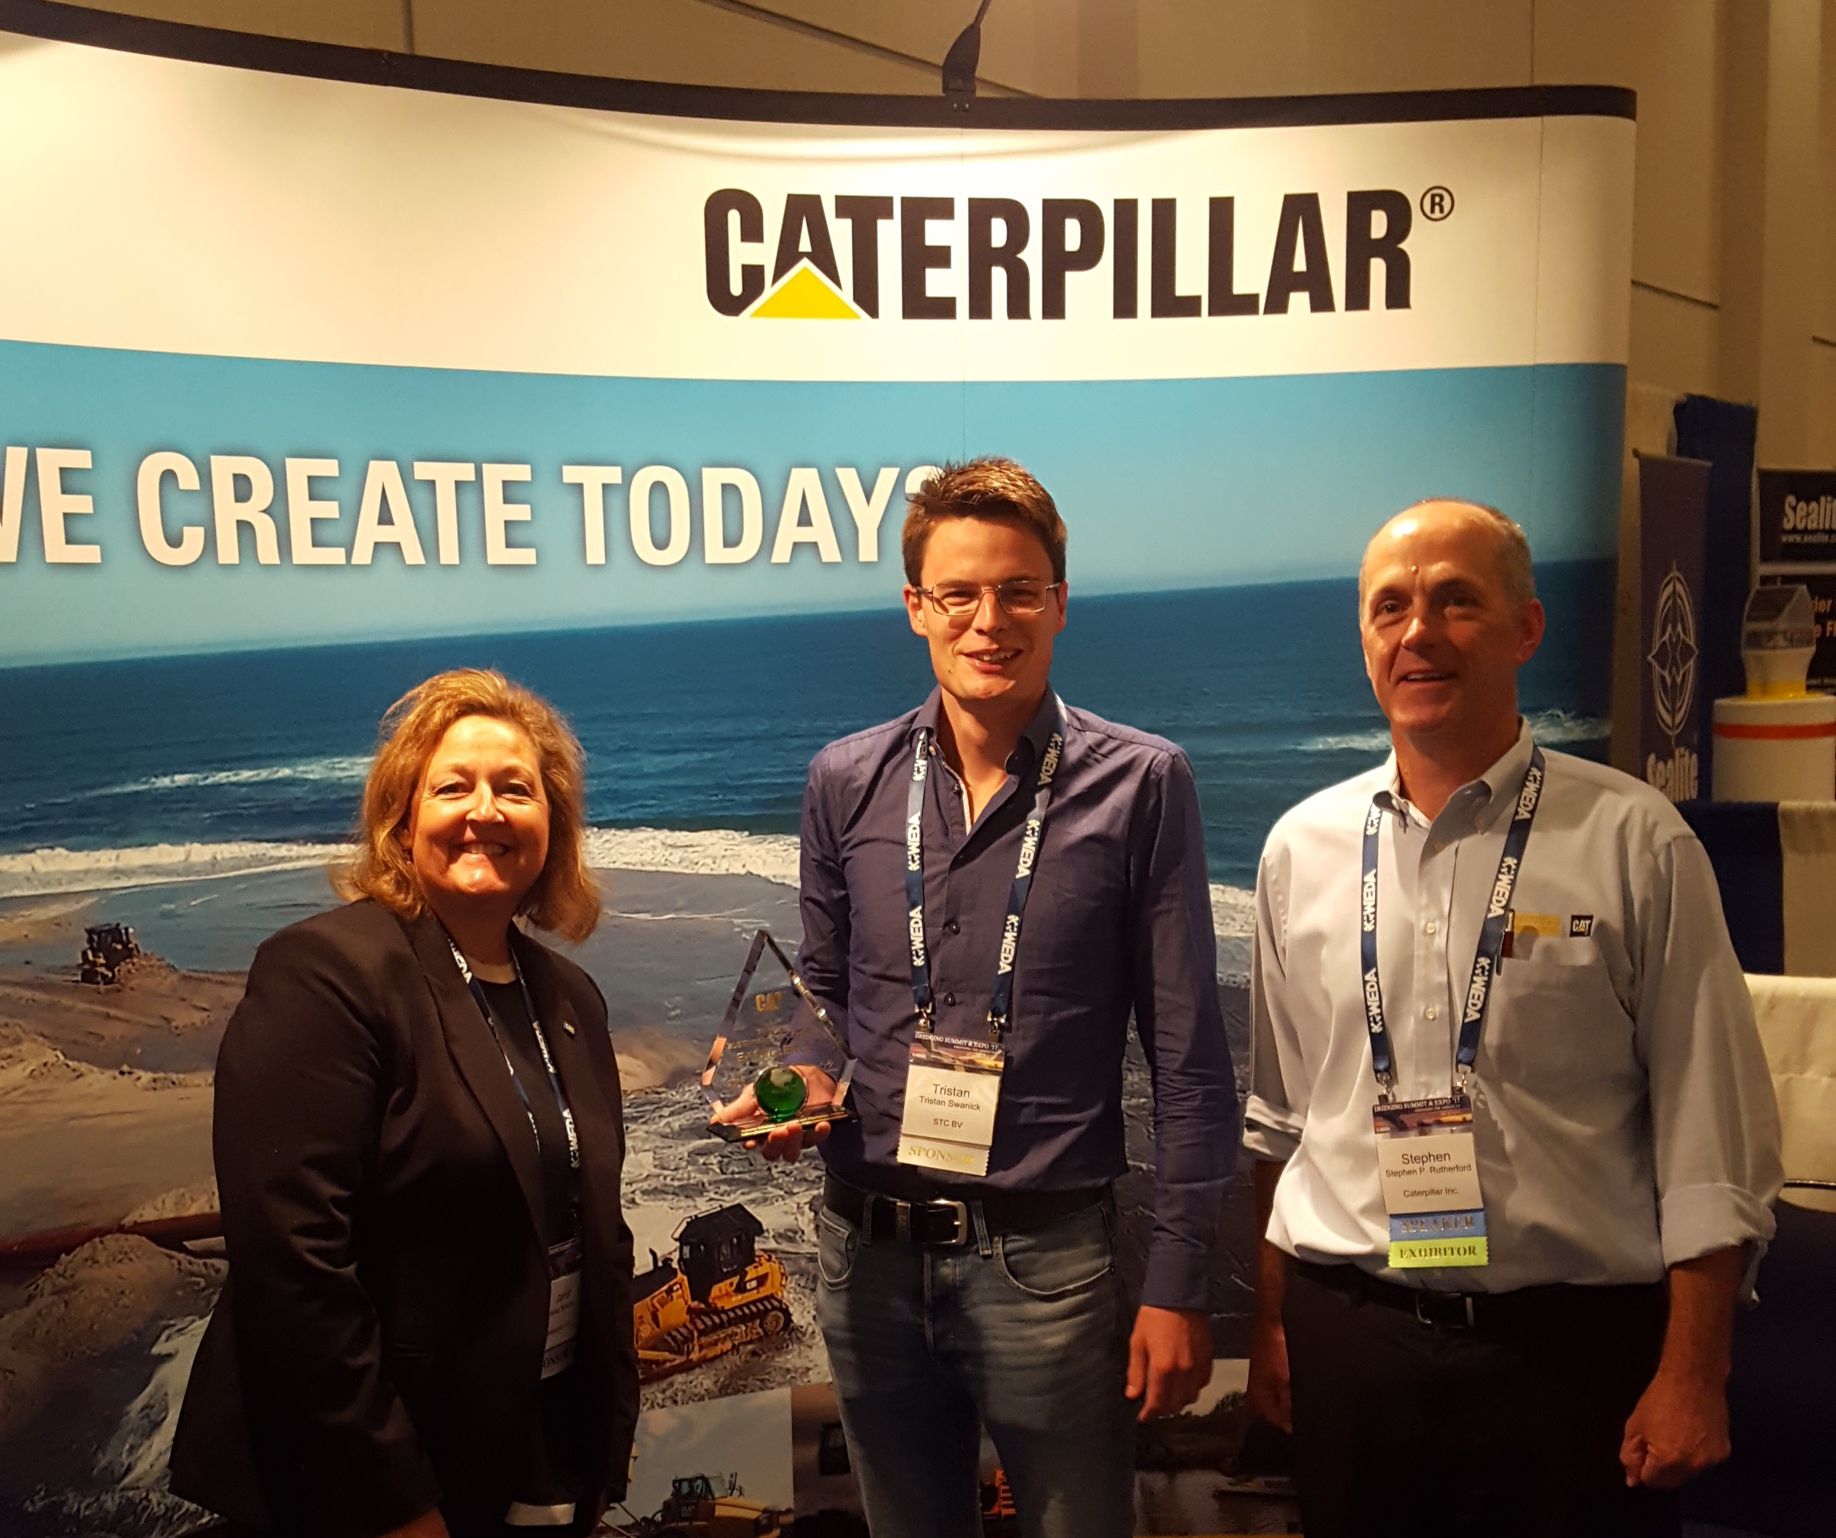 Caterpillar representatives Janet Kirkton and Stephen Rutherford presented Tristan Swanink of STC B.V. with our Caterpillar Excellence Award for Sustainability in Process Innovation.